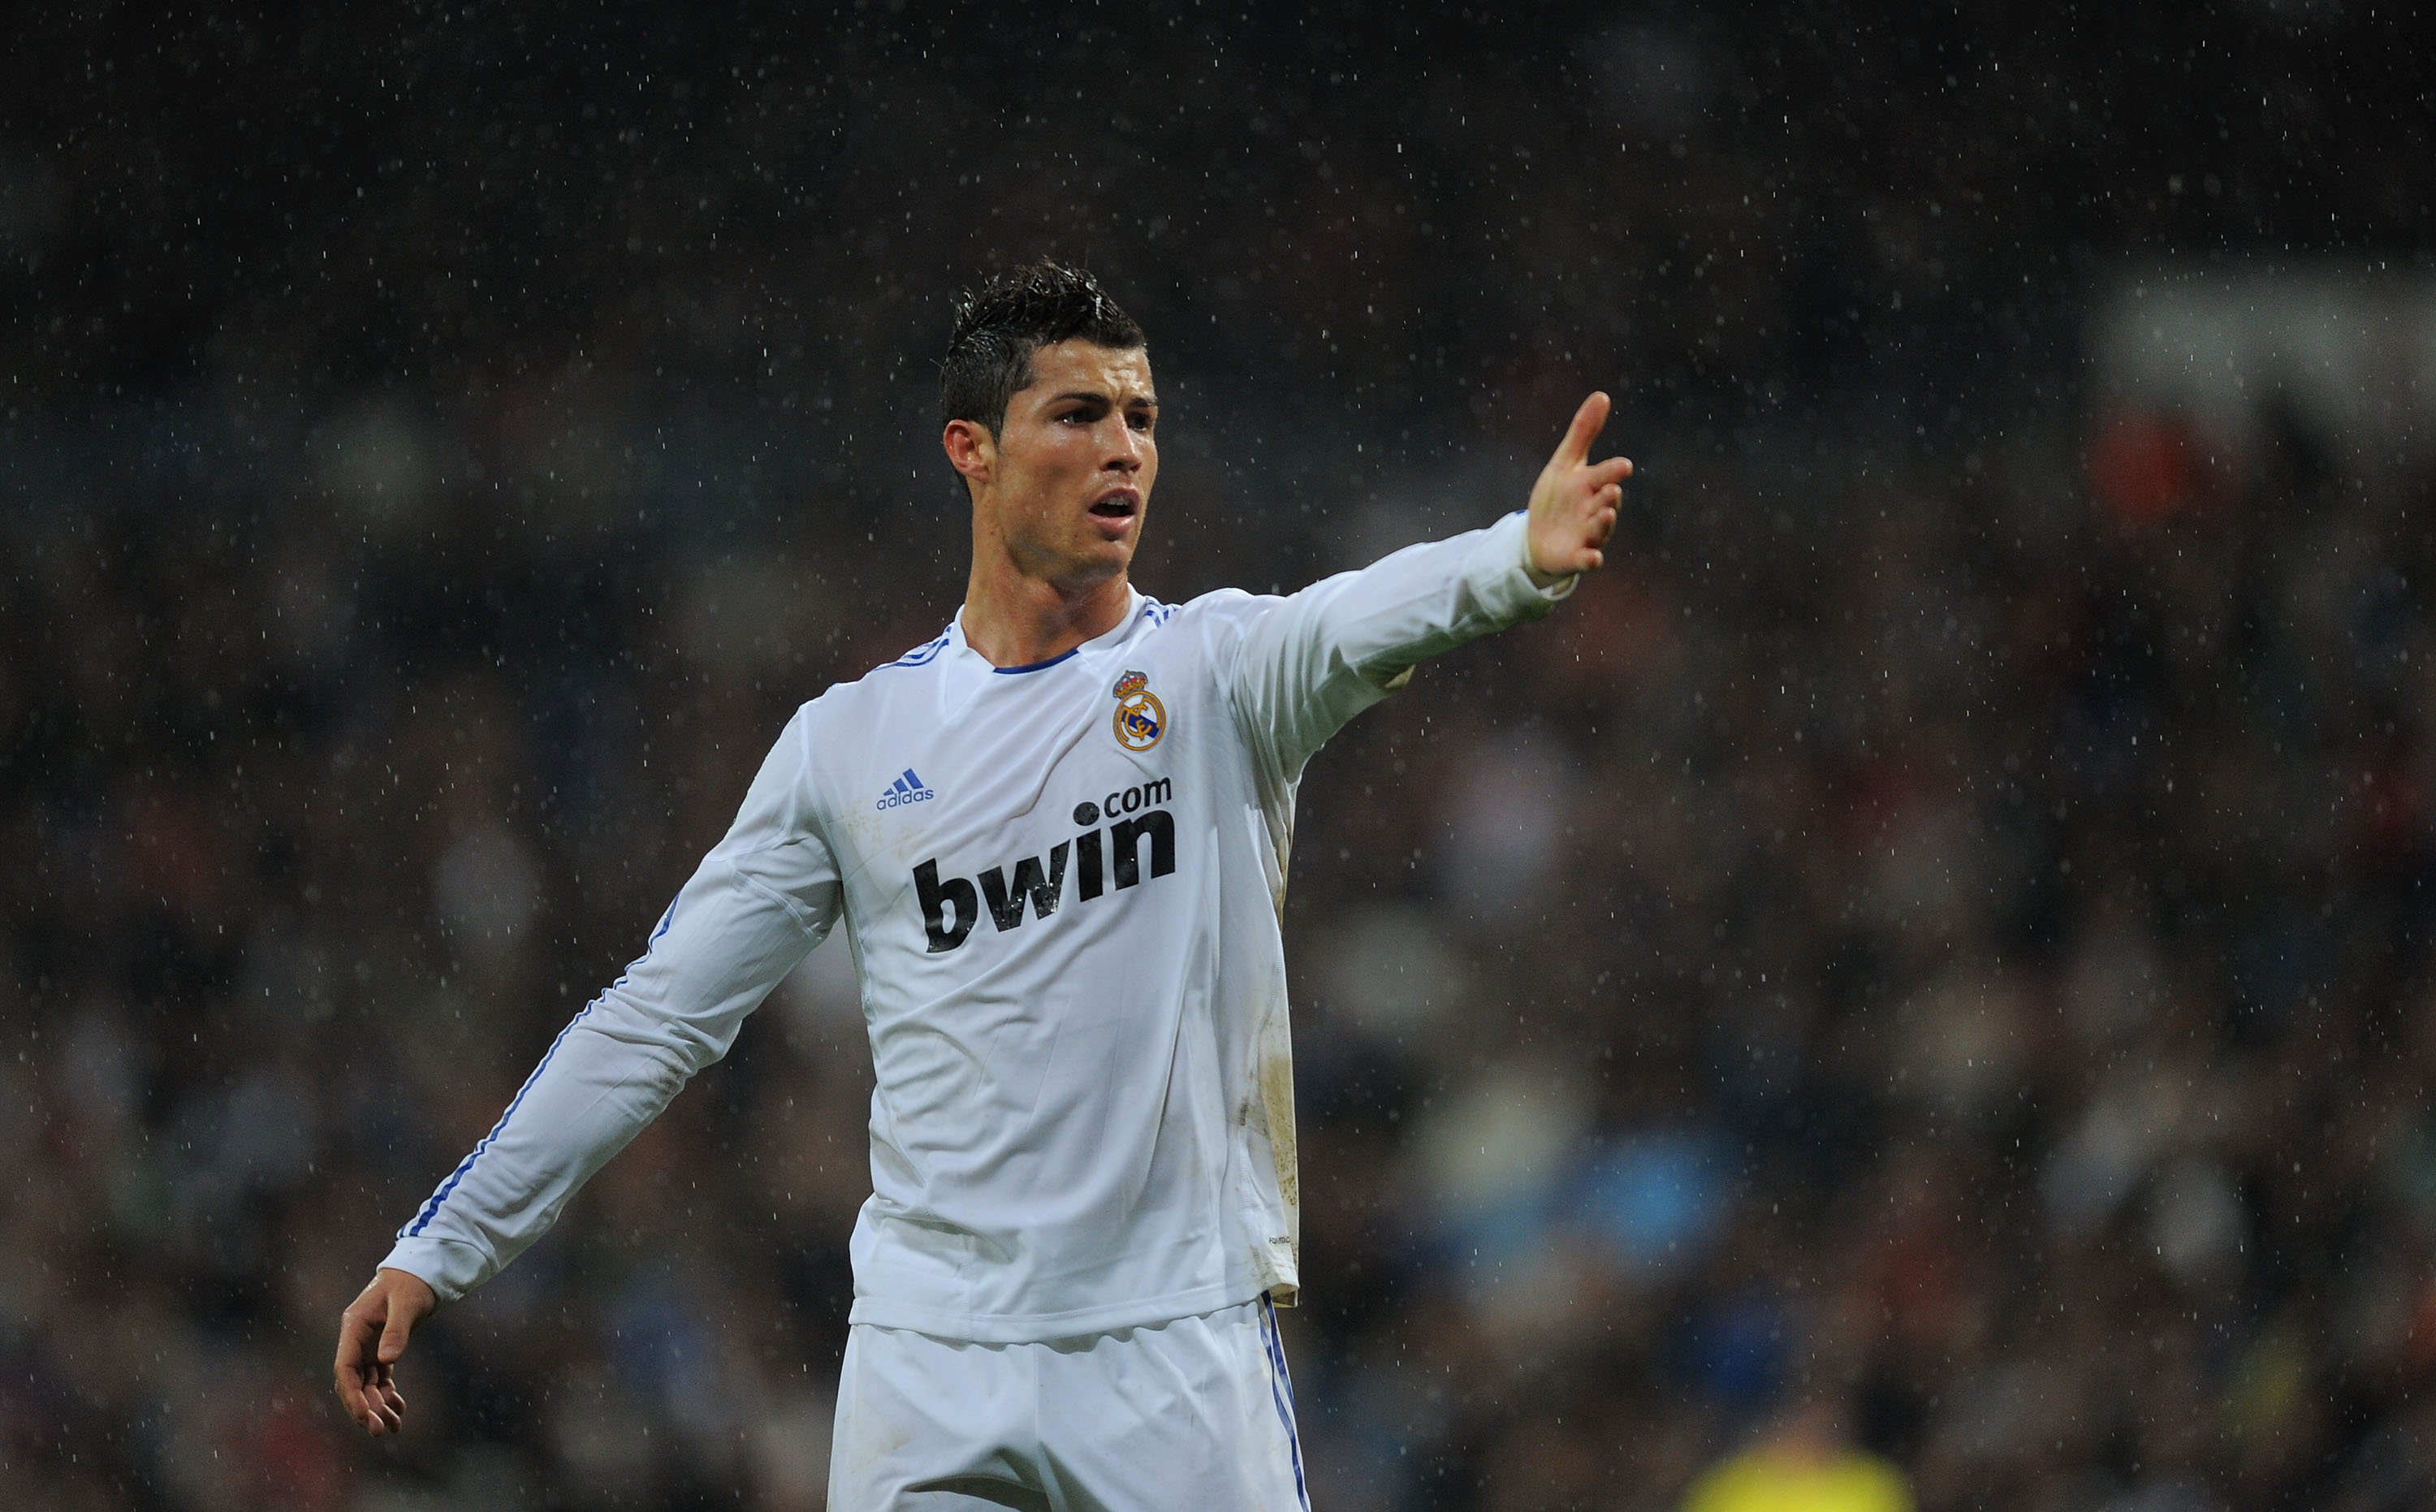 MADRID, SPAIN - FEBRUARY 19:  Cristiano Ronaldo of Real Madrid reacts during the  La Liga match between Real Madrid and Levante at Estadio Santiago Bernabeu on February 19, 2011 in Madrid, Spain.  (Photo by Denis Doyle/Getty Images)